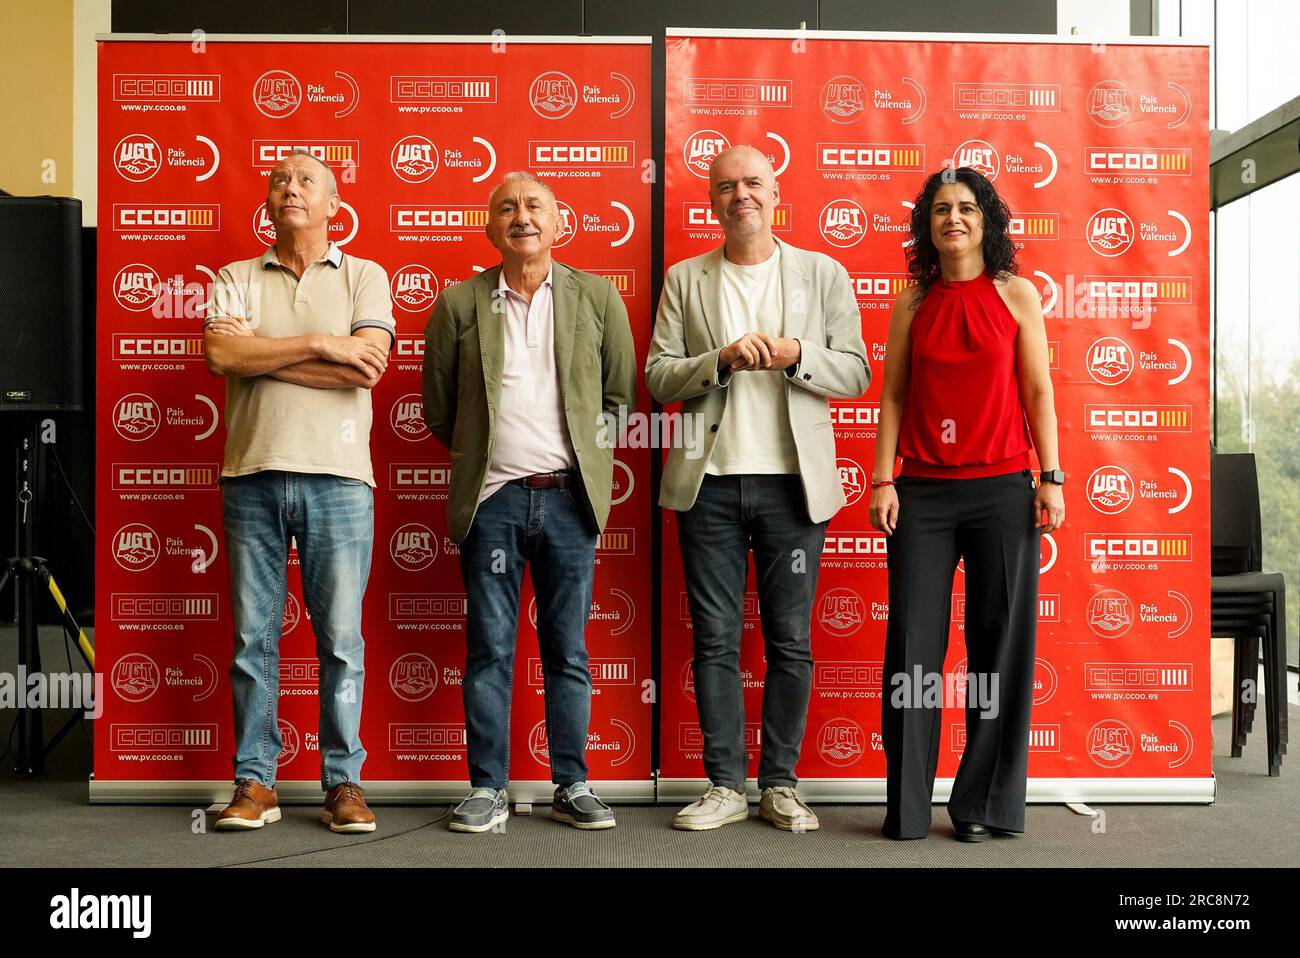 (L-R) The secretary general of UGT PV, Ismael Sáez; the secretary general of UGT, Pepe Álvarez; the secretary general of CCOO, Unai Sordo, and the secretary general of CCOO PV, Ana García, pose on their arrival at the assembly on the occasion of the AvançarEnDrets-Asamblea conjunta UGT-CCOO, in La Rambleta, on July 13, 2023, in Valencia, Community of Valencia (Spain). Under the name 'Advancing in rights' this meeting between the majority trade unions in Spain will take place. 13 JULY 2023;VALENCIA;JOINT ASSEMBLY;UGT AND CCOO Eduardo Manzana / Europa Press 07/13/2023 (Europa Press via AP) Foto Stock